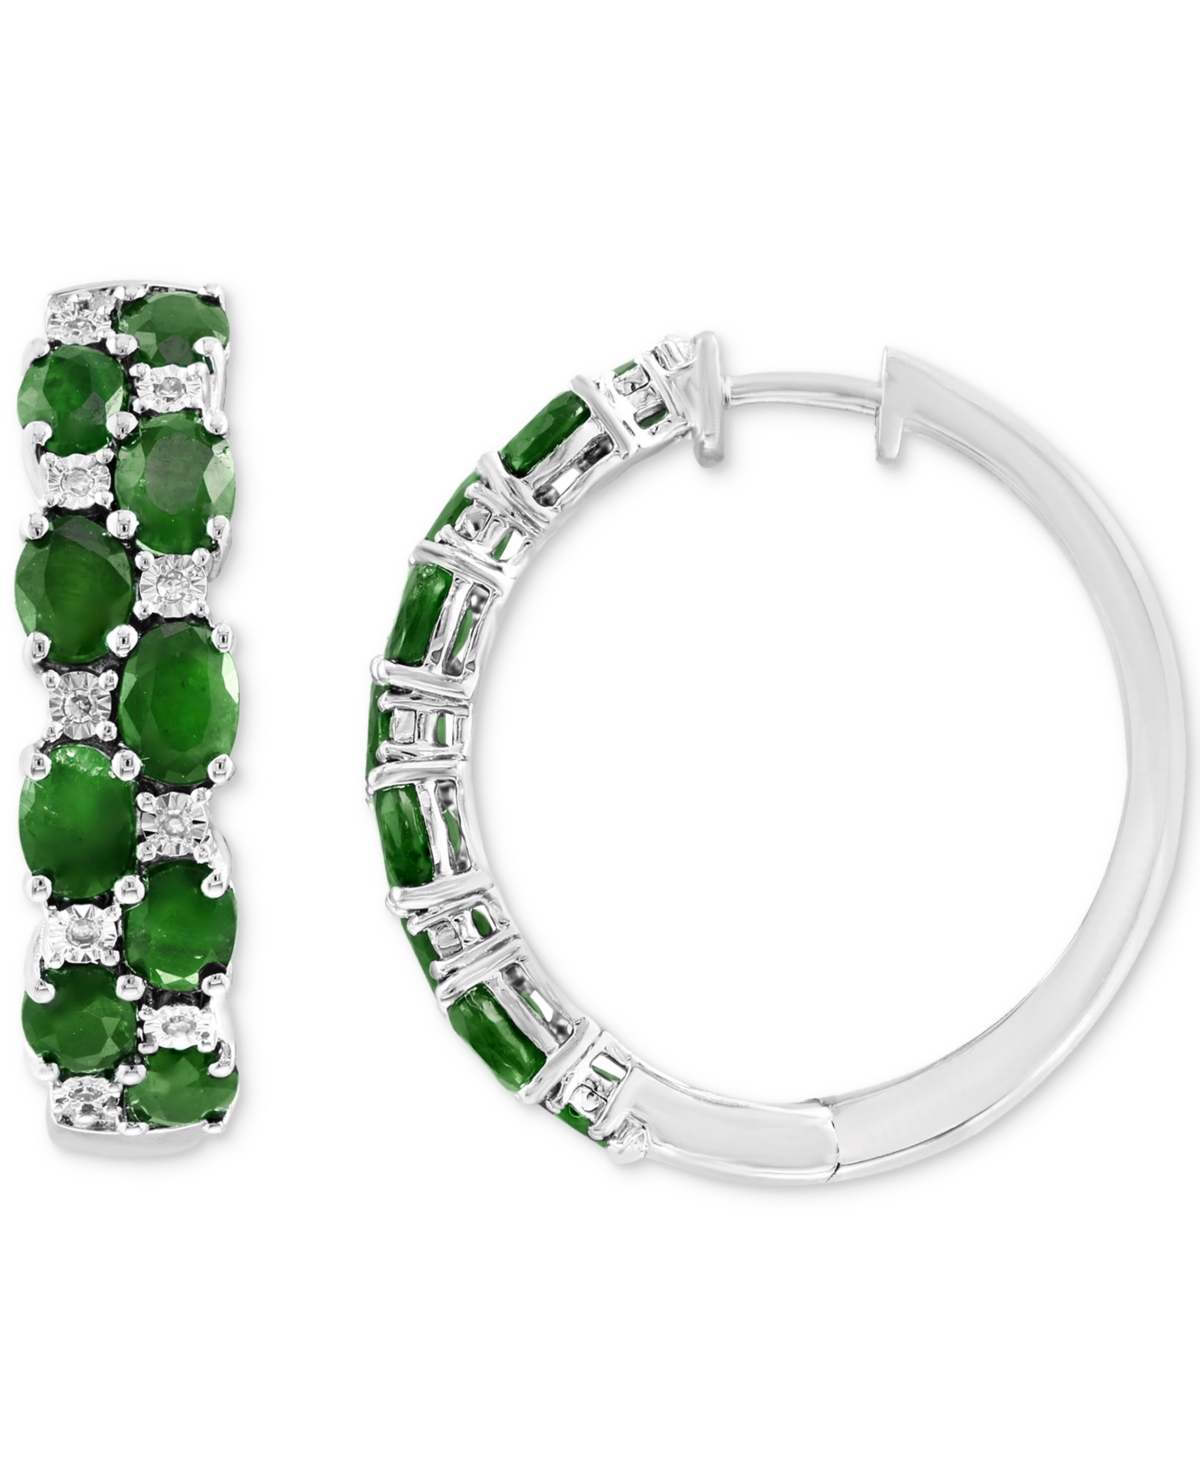 Effy Emerald & Diamond Small Earrings in Sterling Silver (Also available in Sapphire and Ruby) - Ruby